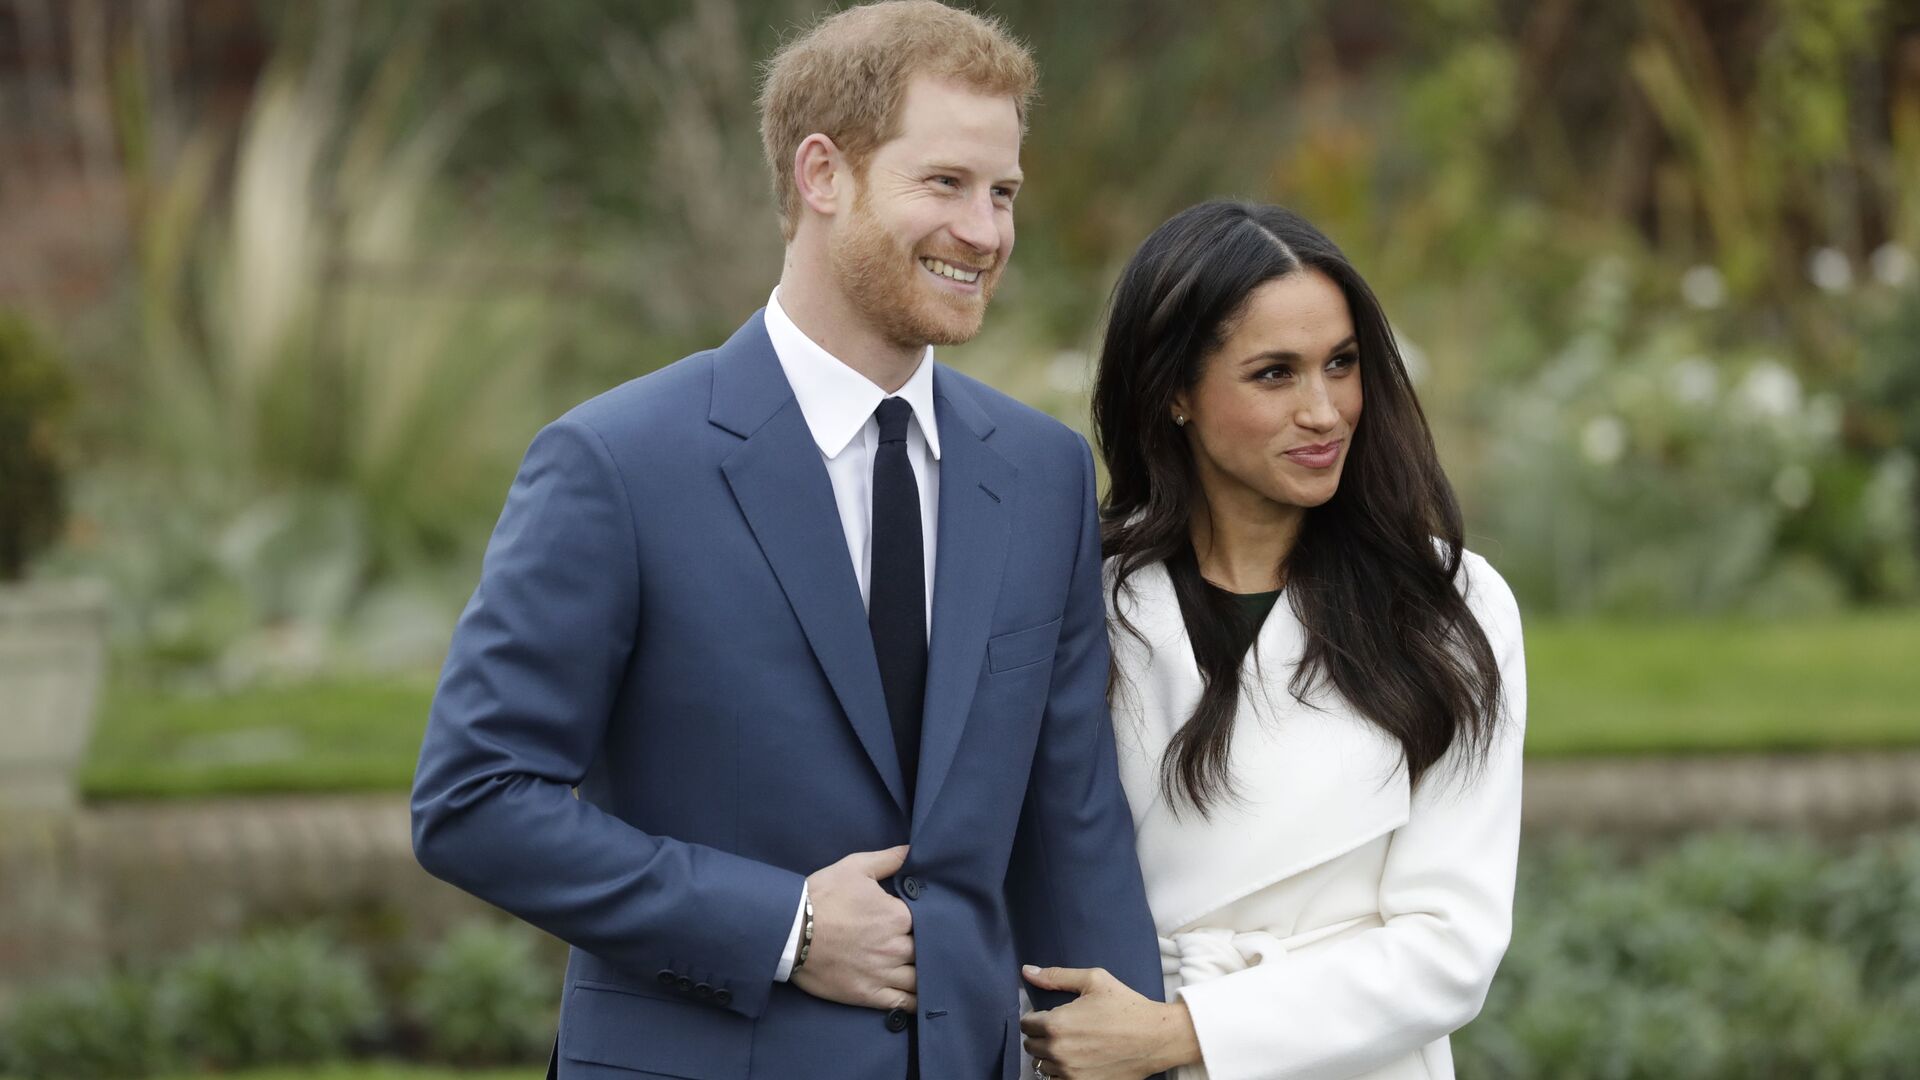 Britain's Prince Harry and his fiancee Meghan Markle pose for photographers during a photocall in the grounds of Kensington Palace in London, Monday Nov. 27, 2017 - Sputnik International, 1920, 02.03.2022